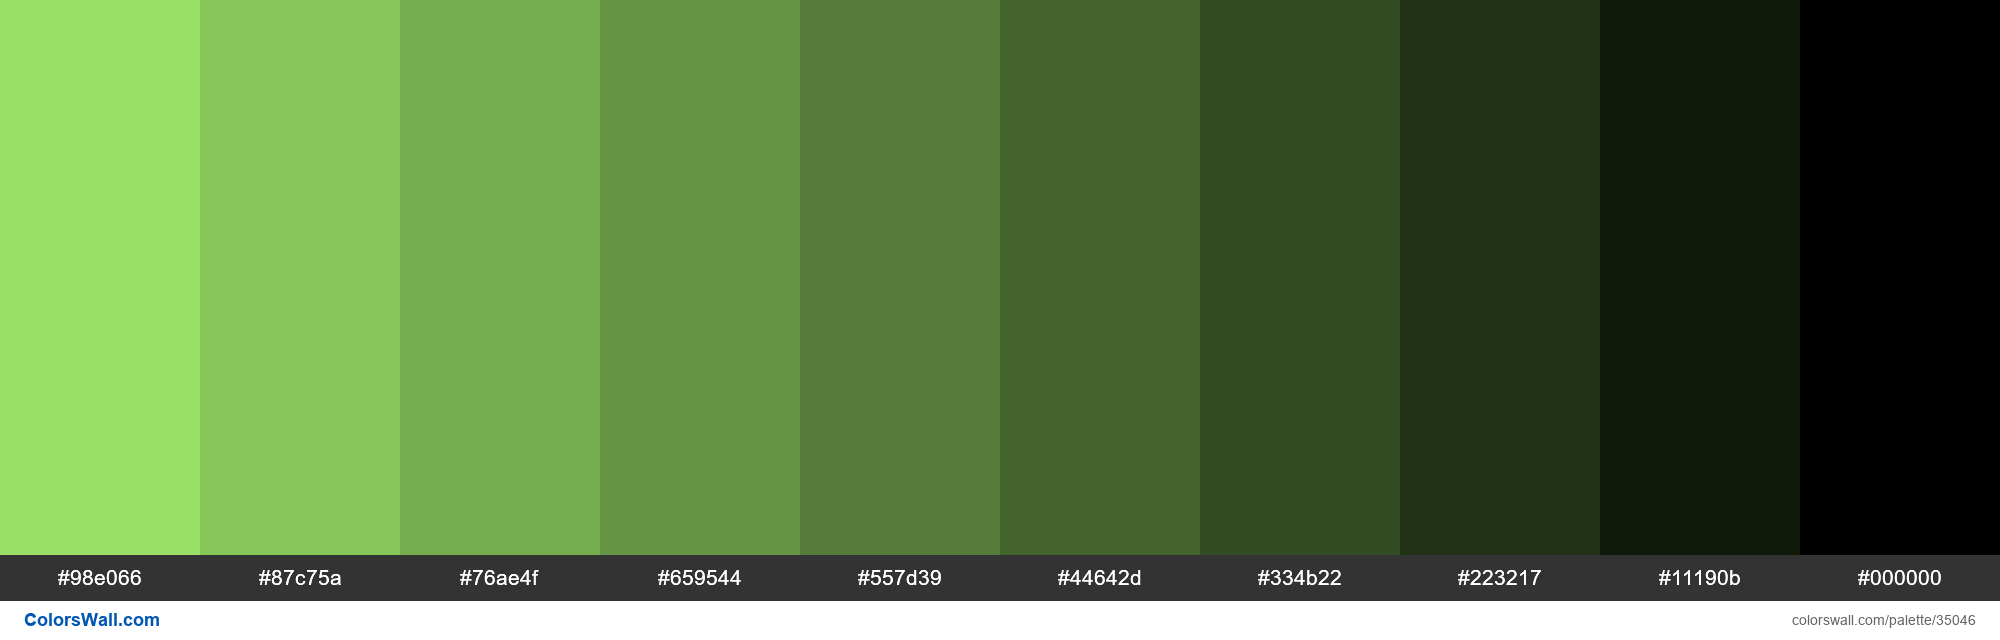 Spring Green Color Codes - The Hex, RGB and CMYK Values That You Need